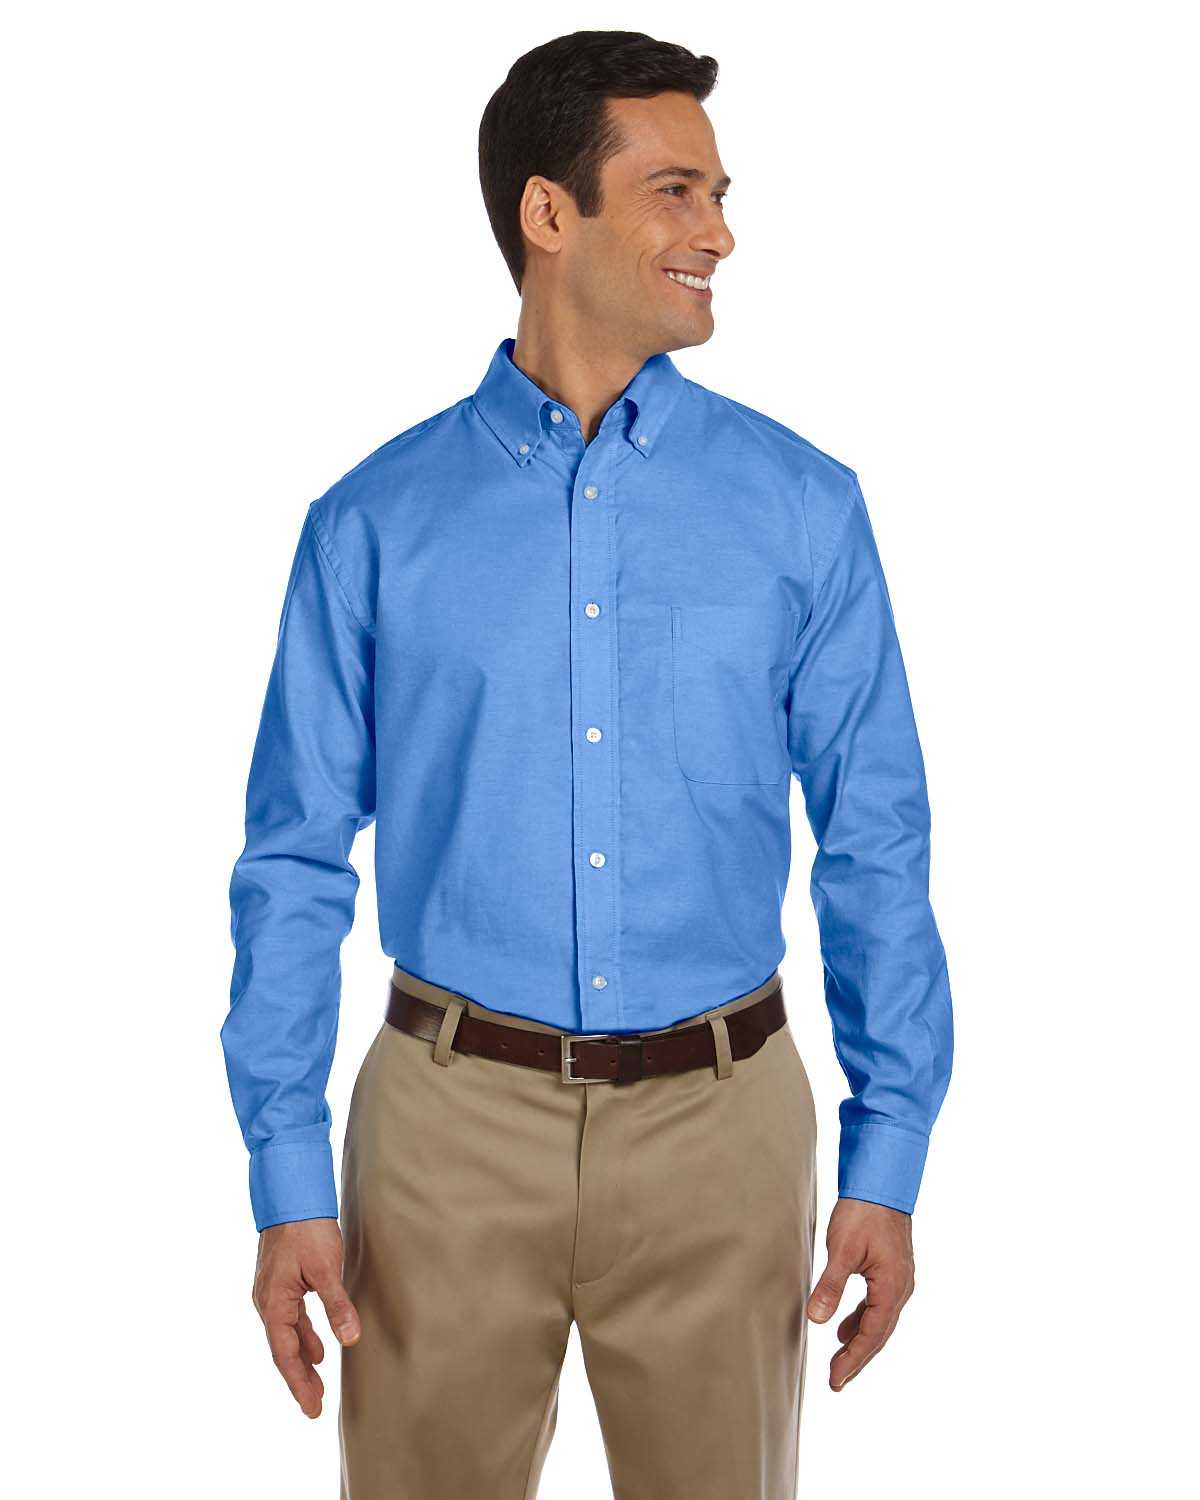 Harriton M600 Men's Long-Sleeve Oxford with Stain-Release ...